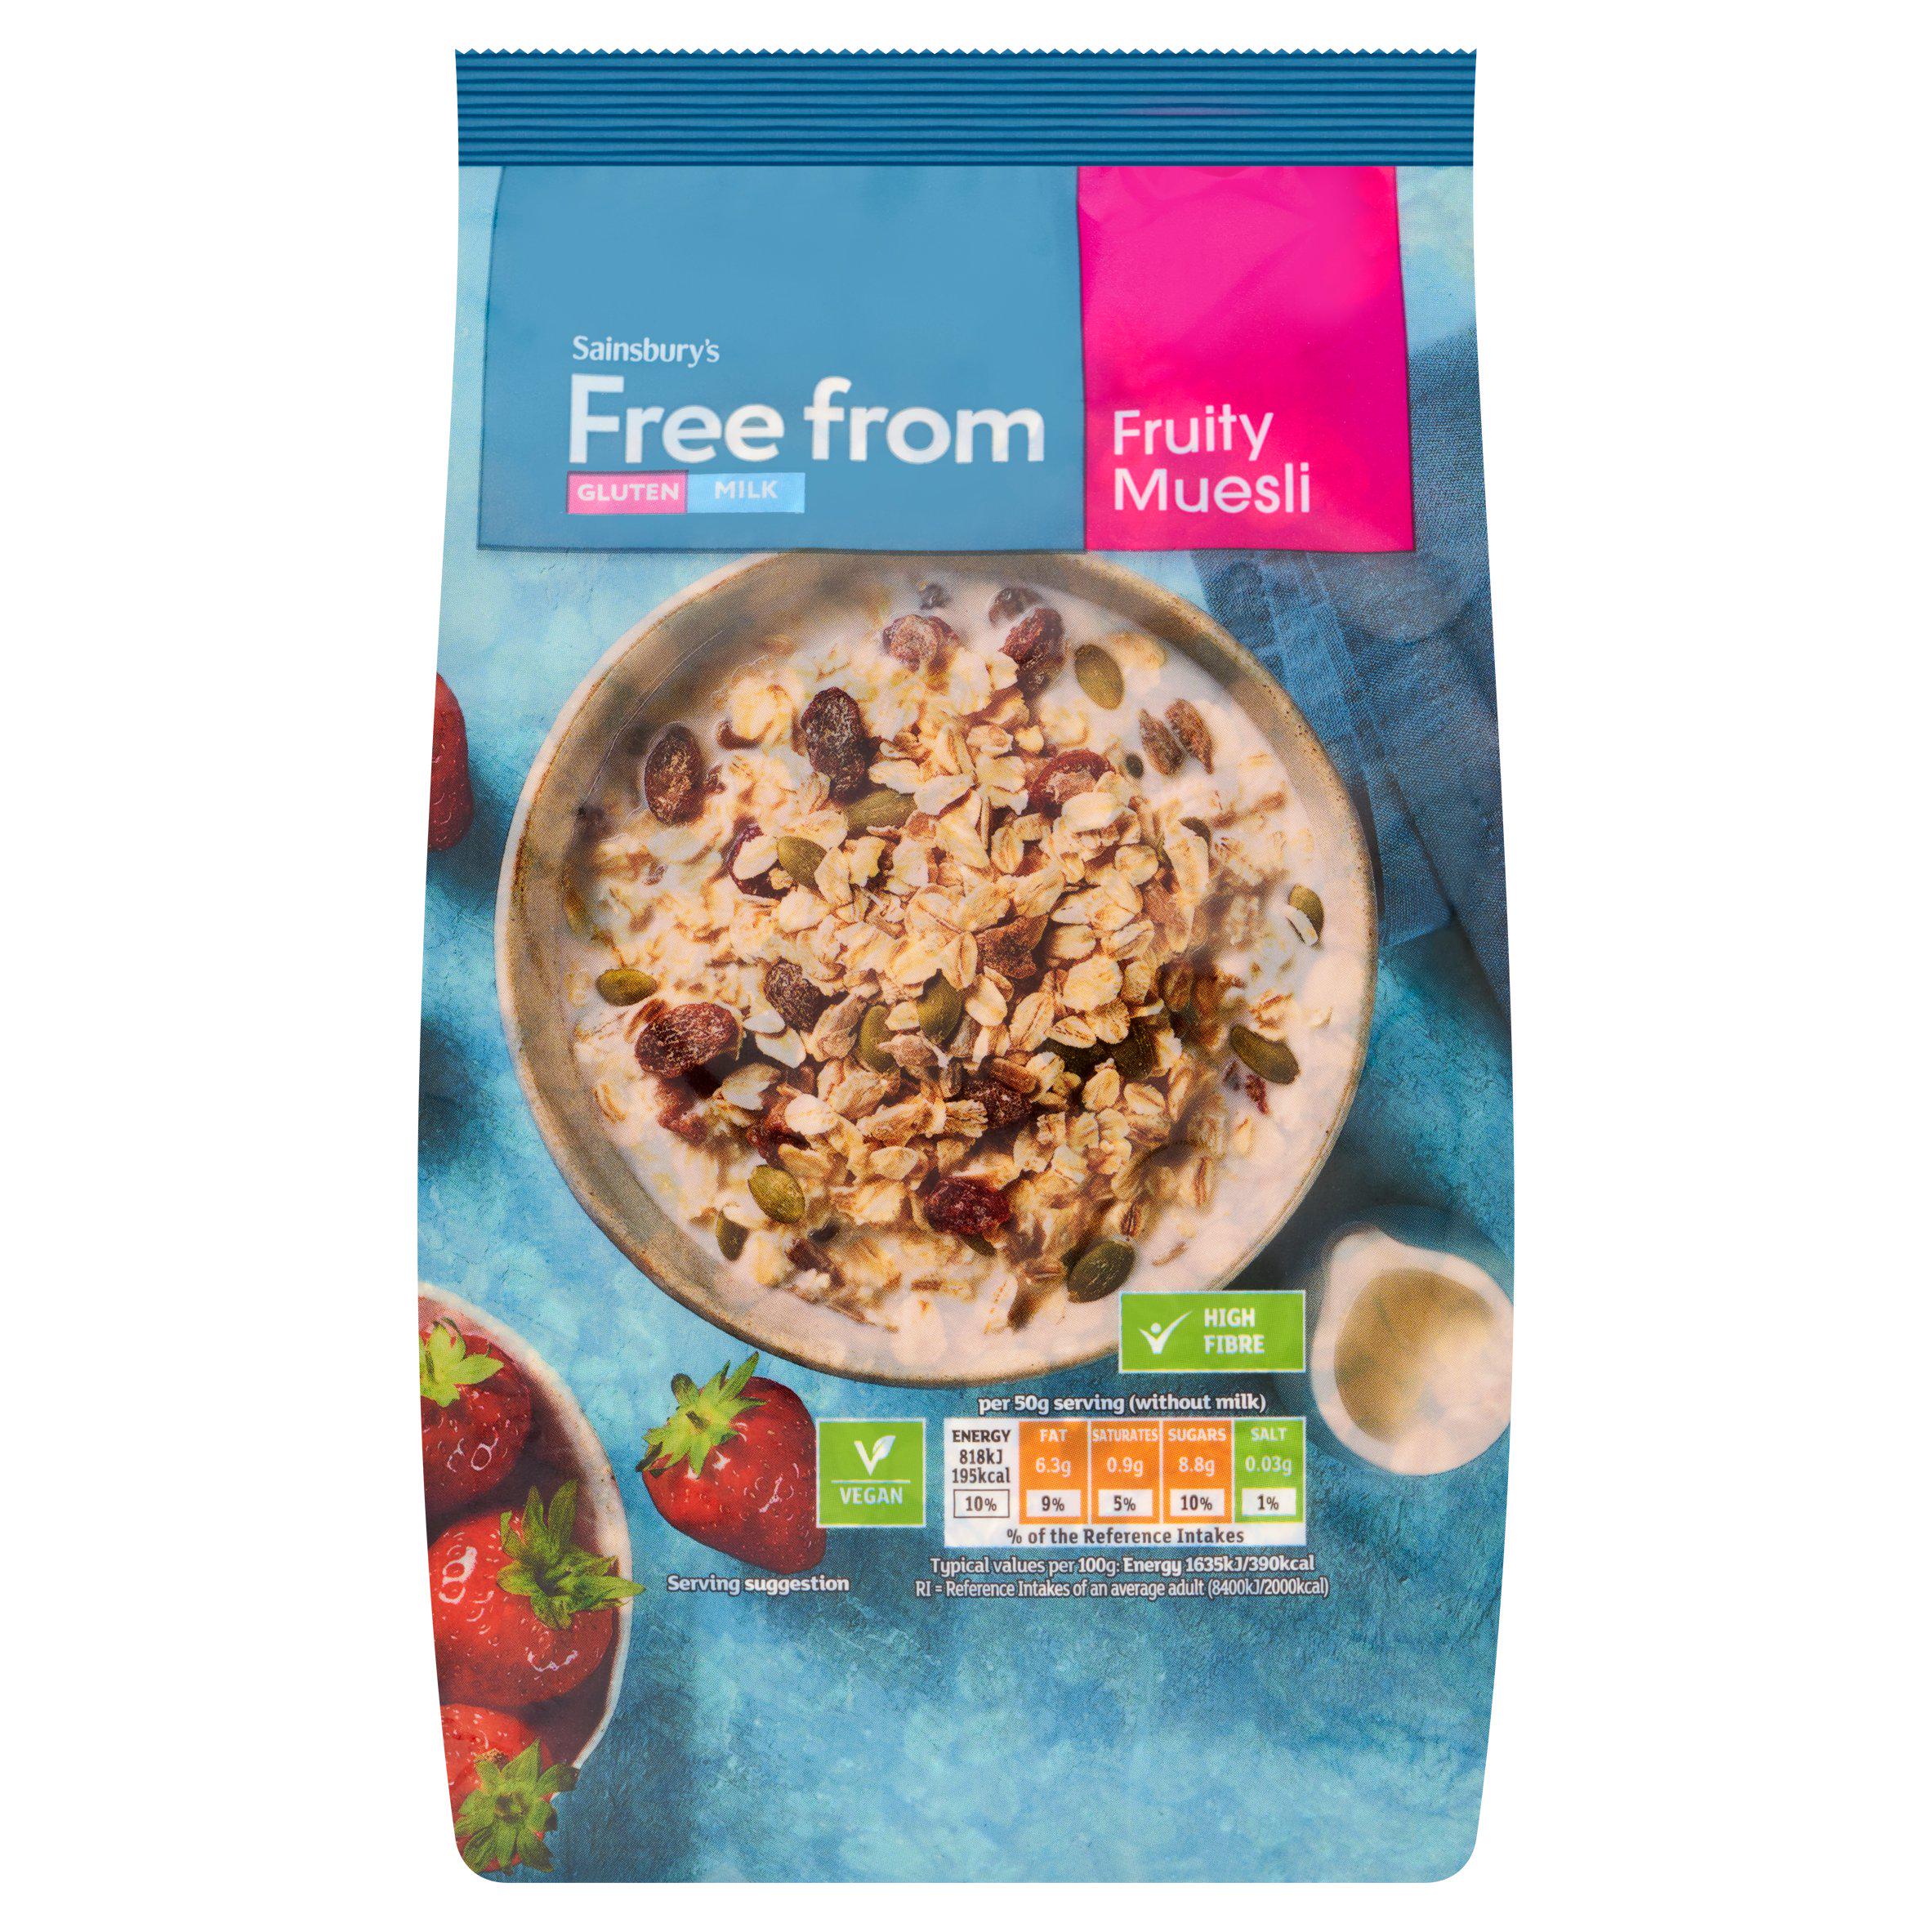 Sainsbury's Deliciously Free From Fruity Muesli 450g